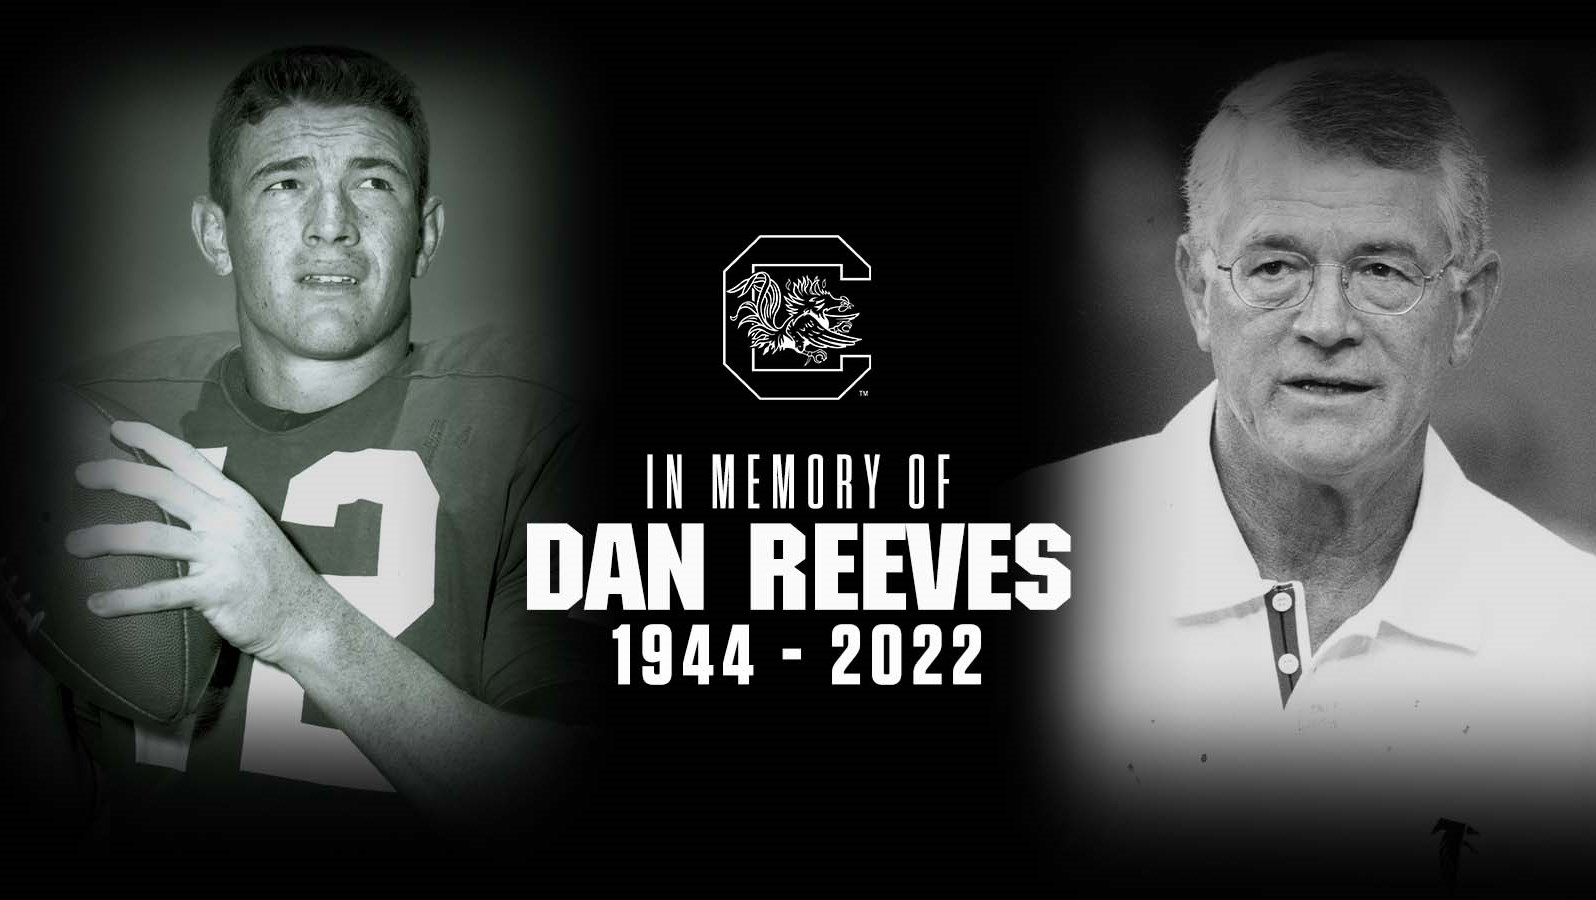 Dan Reeves, Gamecock great and former NFL coach and player, dies at 77